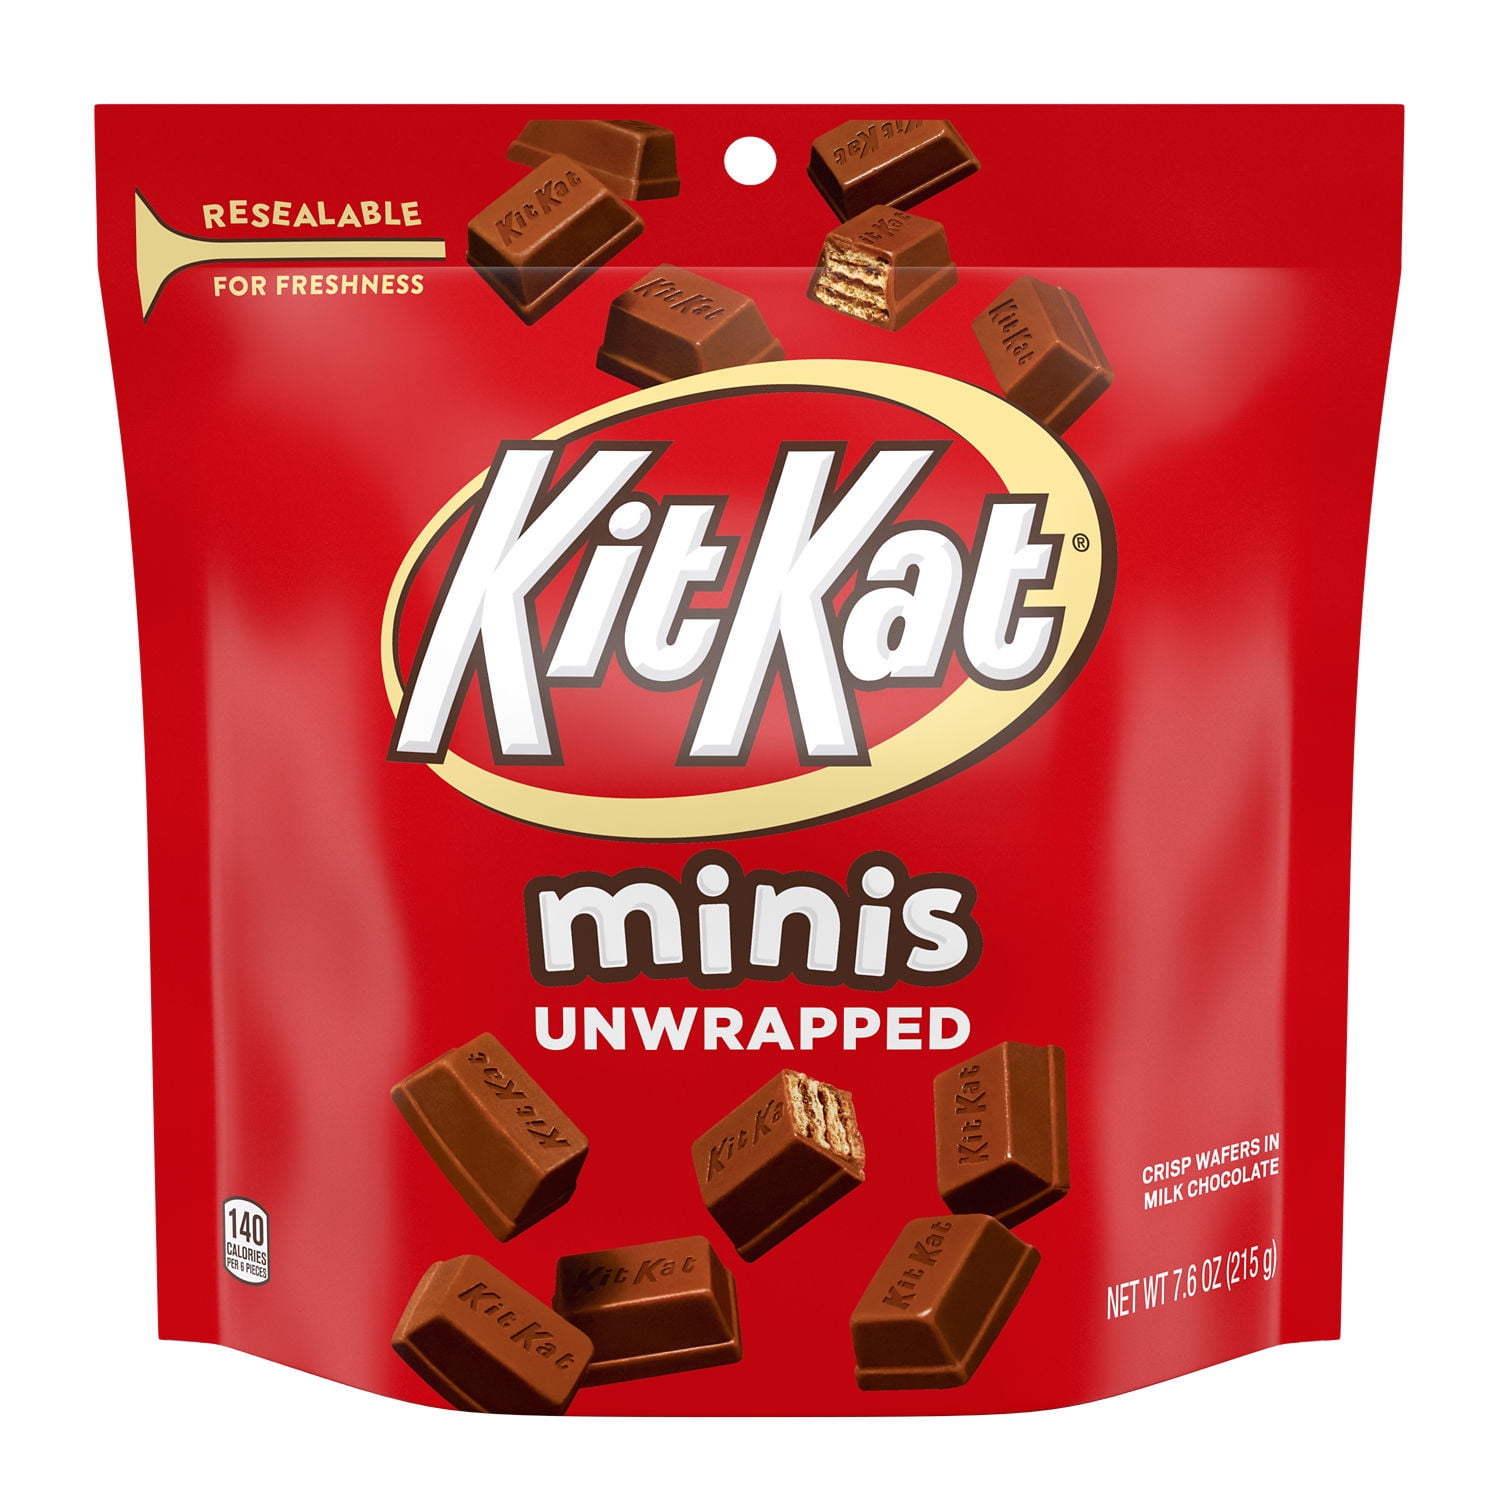 KIT Minis Unwrapped Milk Chocolate Wafer Candy Bar, 7.6 oz, Resealable Pouch - Walmart.com